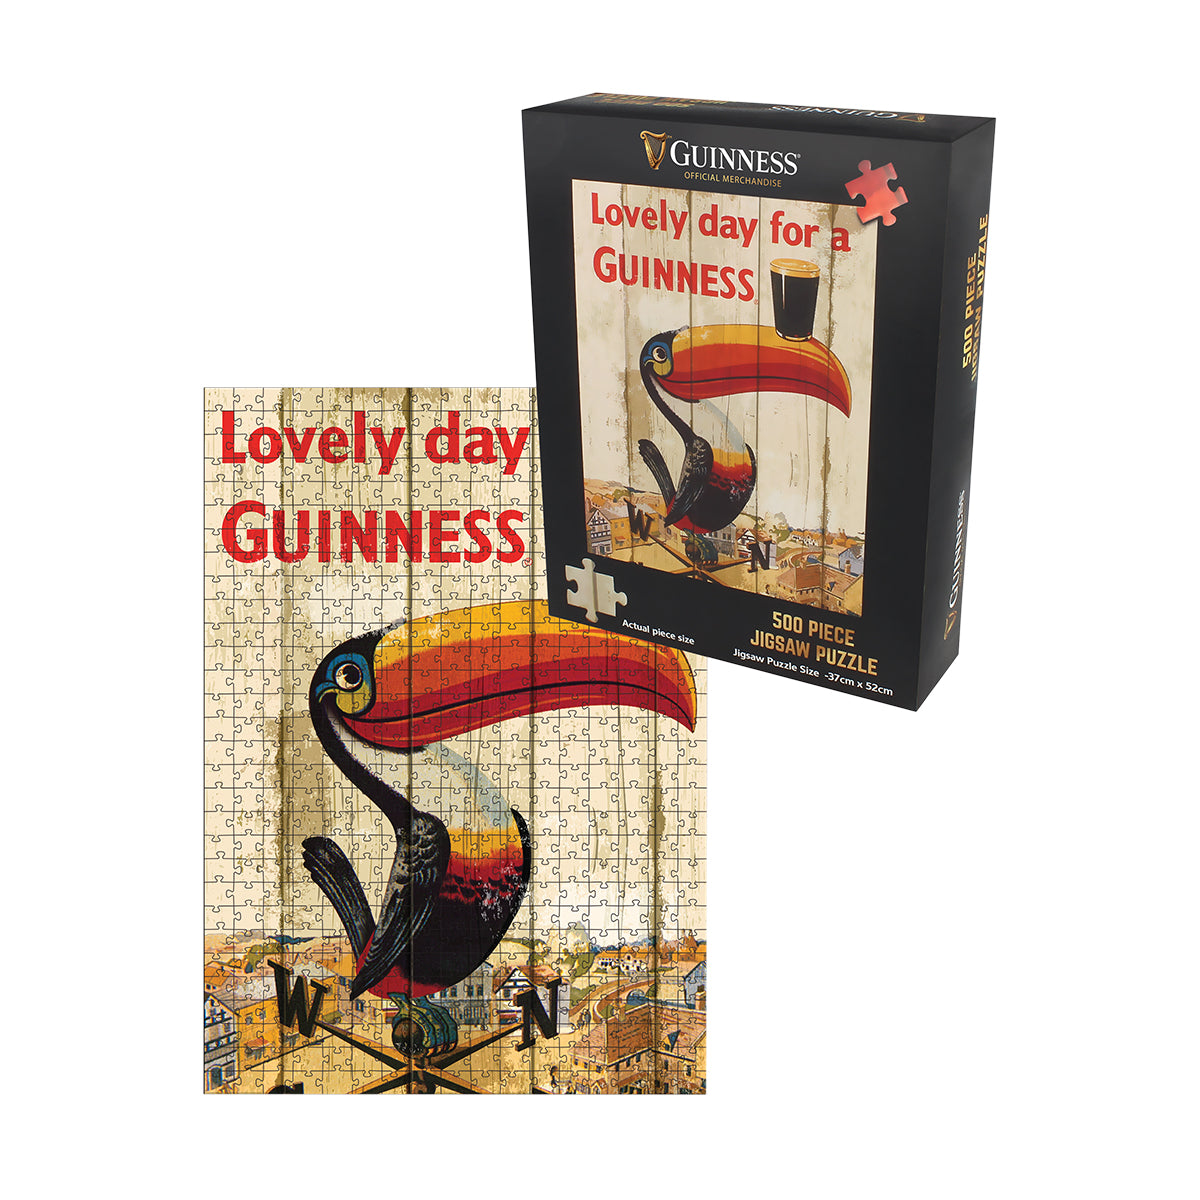 An iconic Guinness Toucan Jigsaw Puzzle 1000 Pcs with an image of a toucan and a guinea pig, made by Guinness UK.